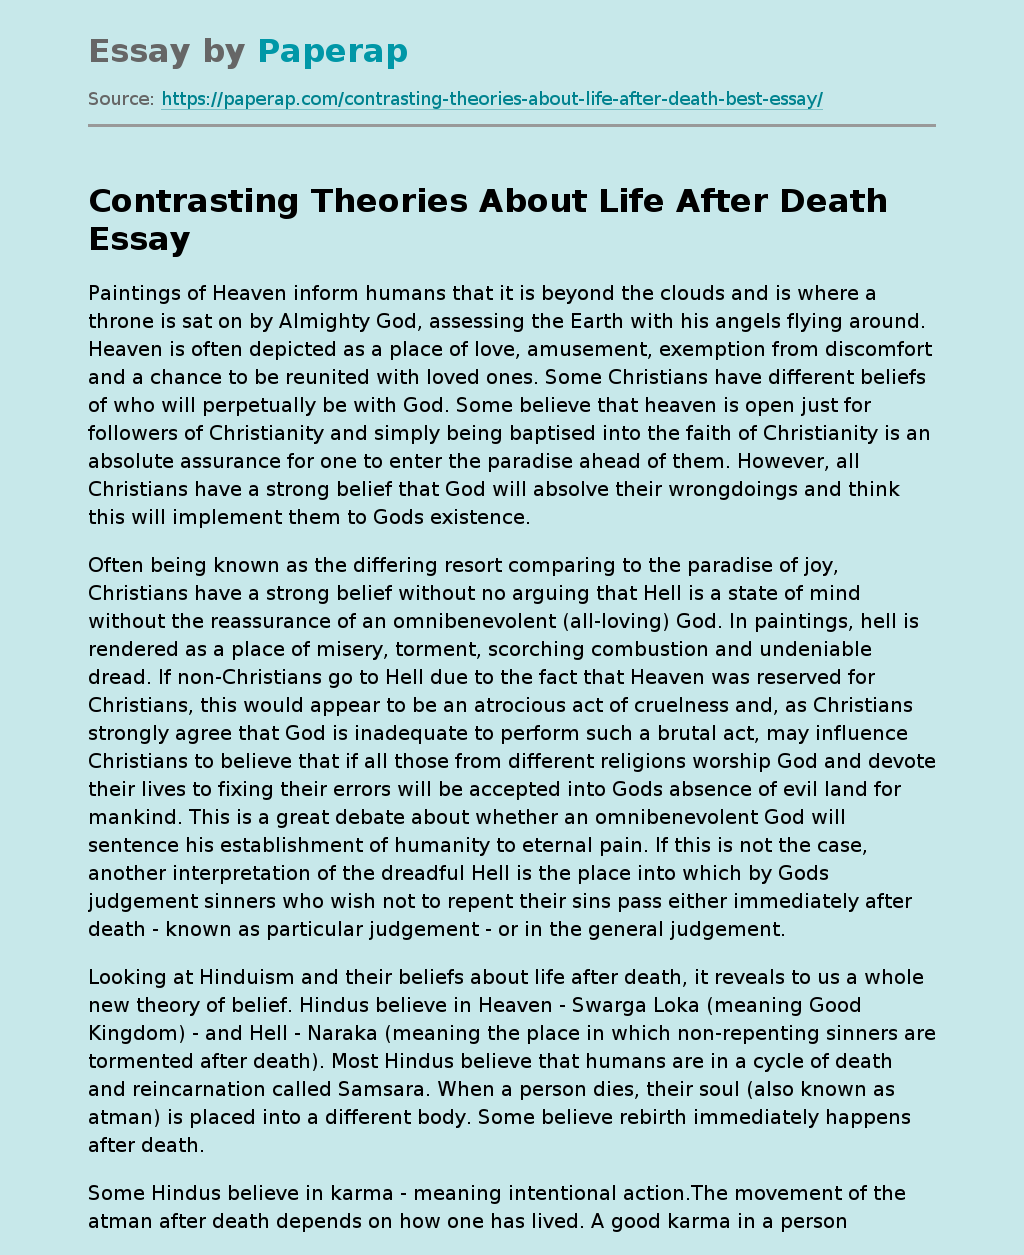 Contrasting Theories About Life After Death